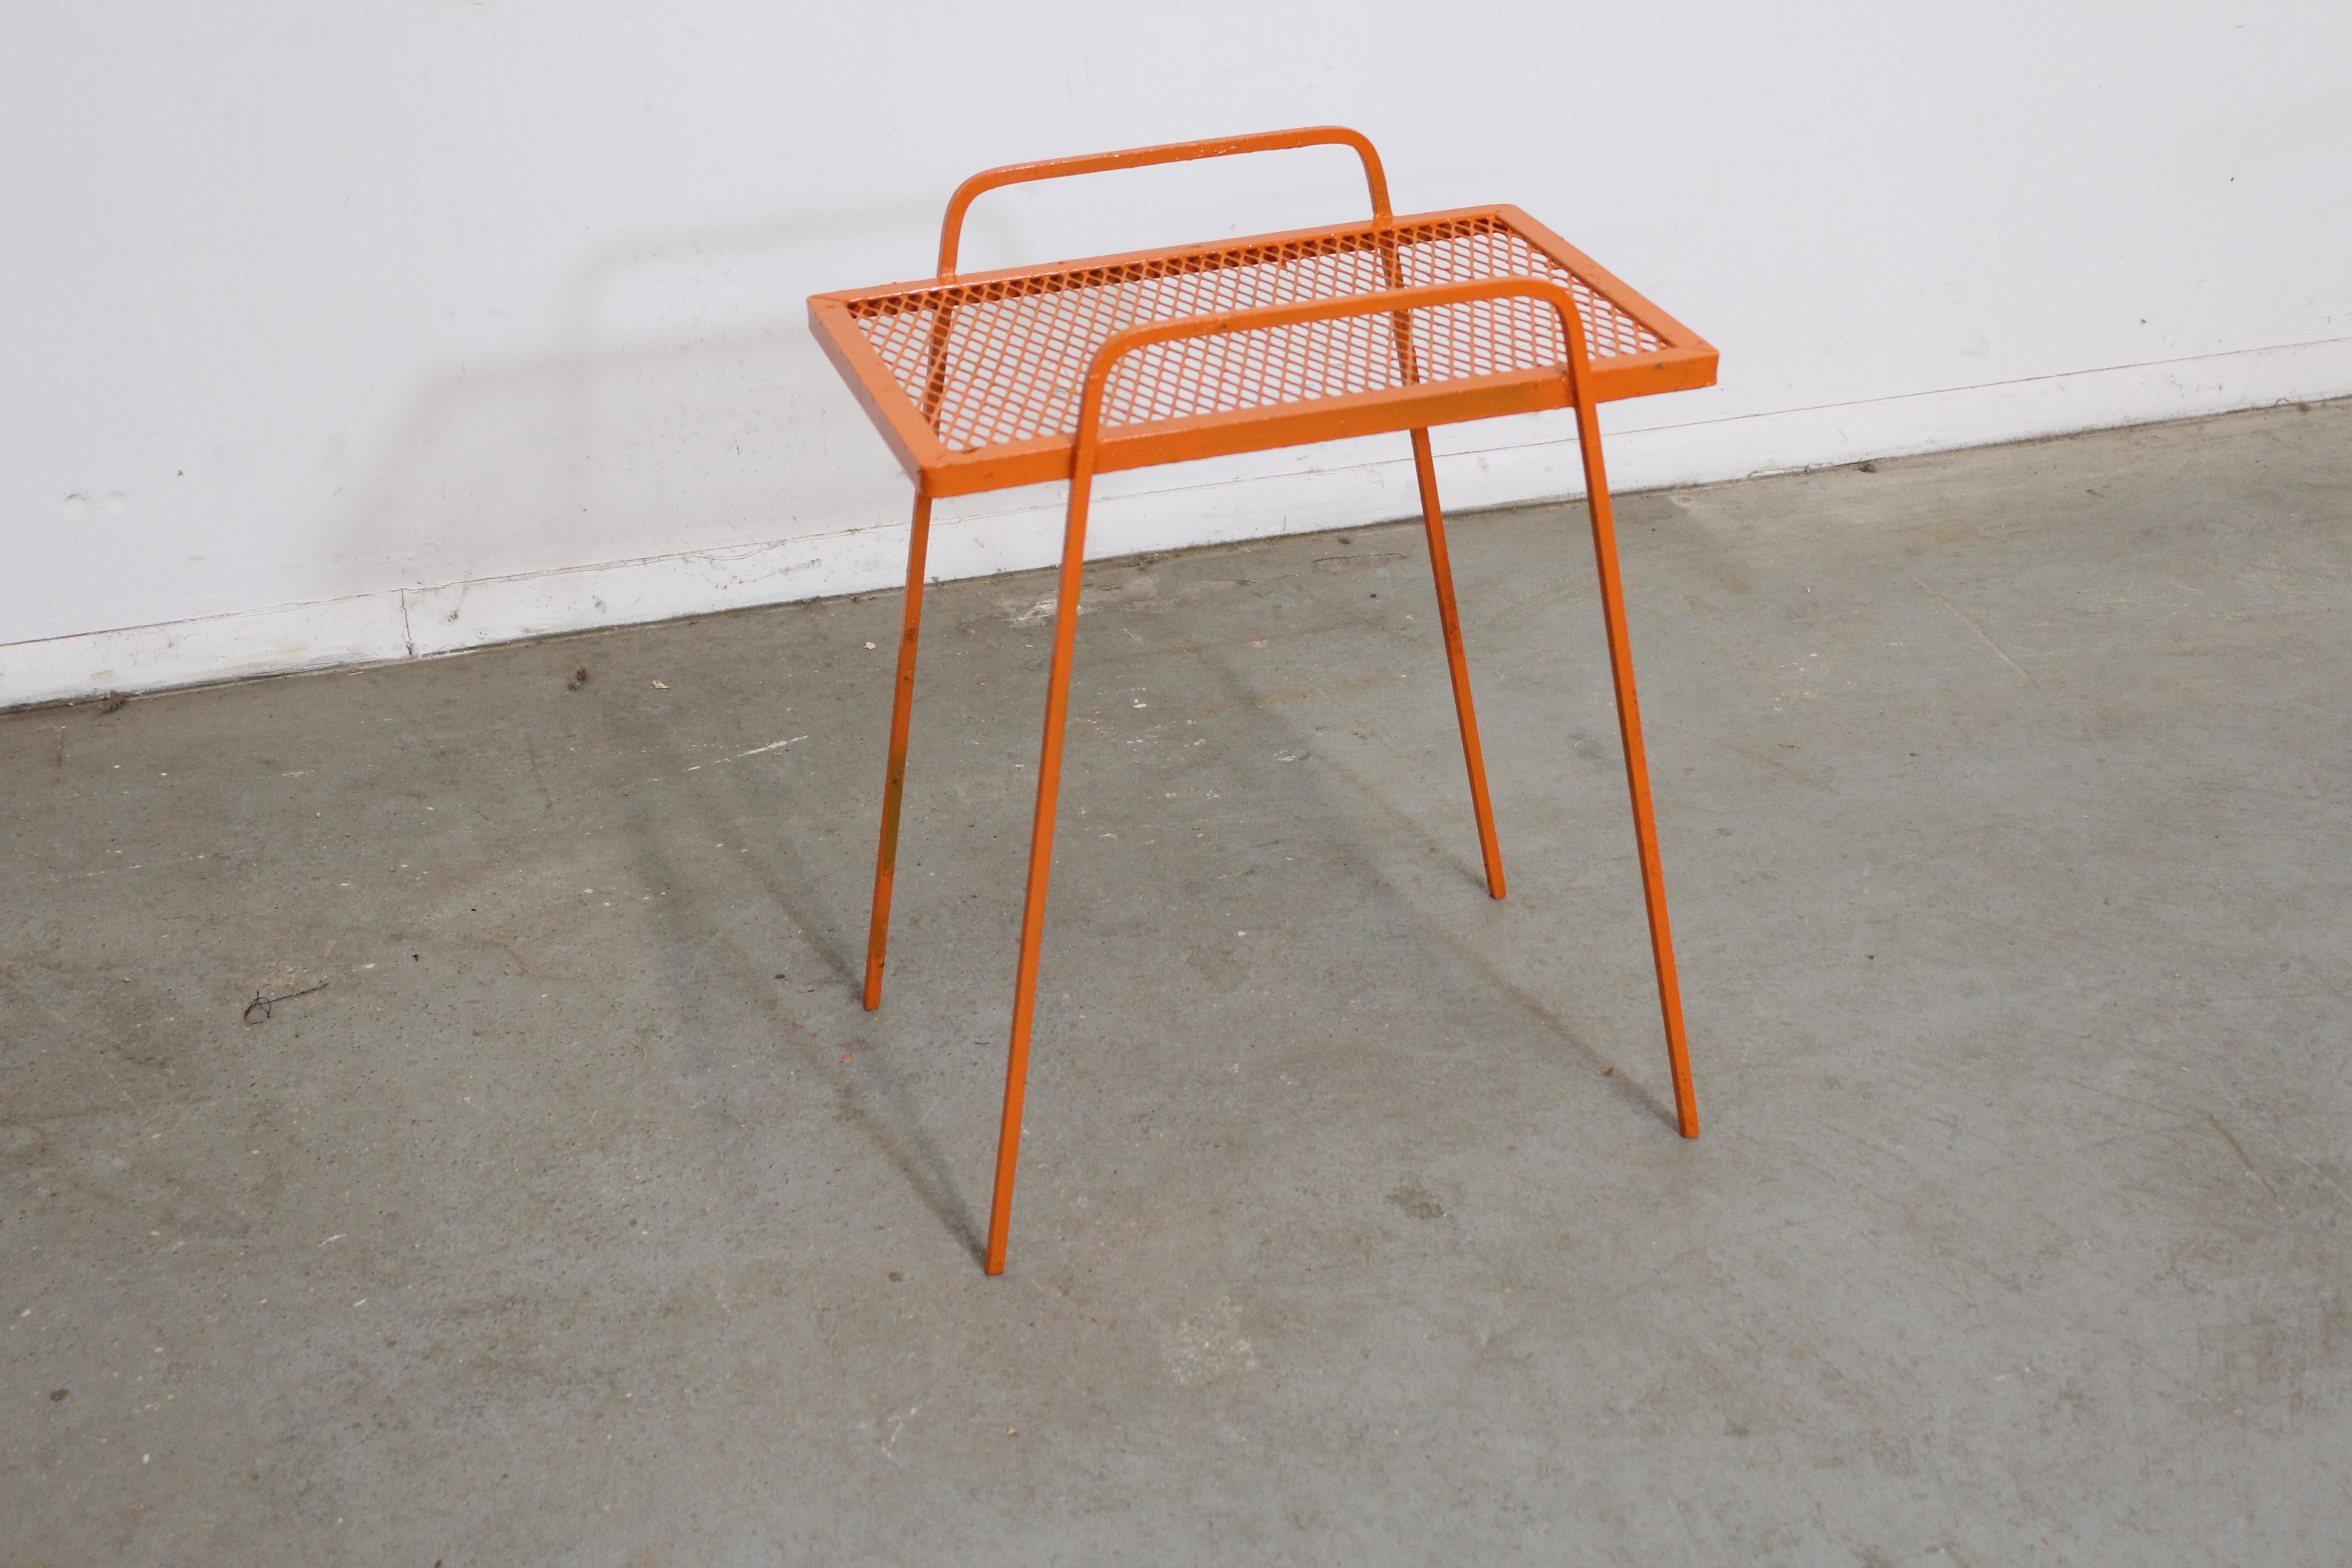 Offered is a vintage Mid-Century Modern atomic orange metal tall end table, circa 1960's. This piece is made of welded steel and features gracefully styled legs and a mesh top. It is in good condition considering its age with minor age wear (surface